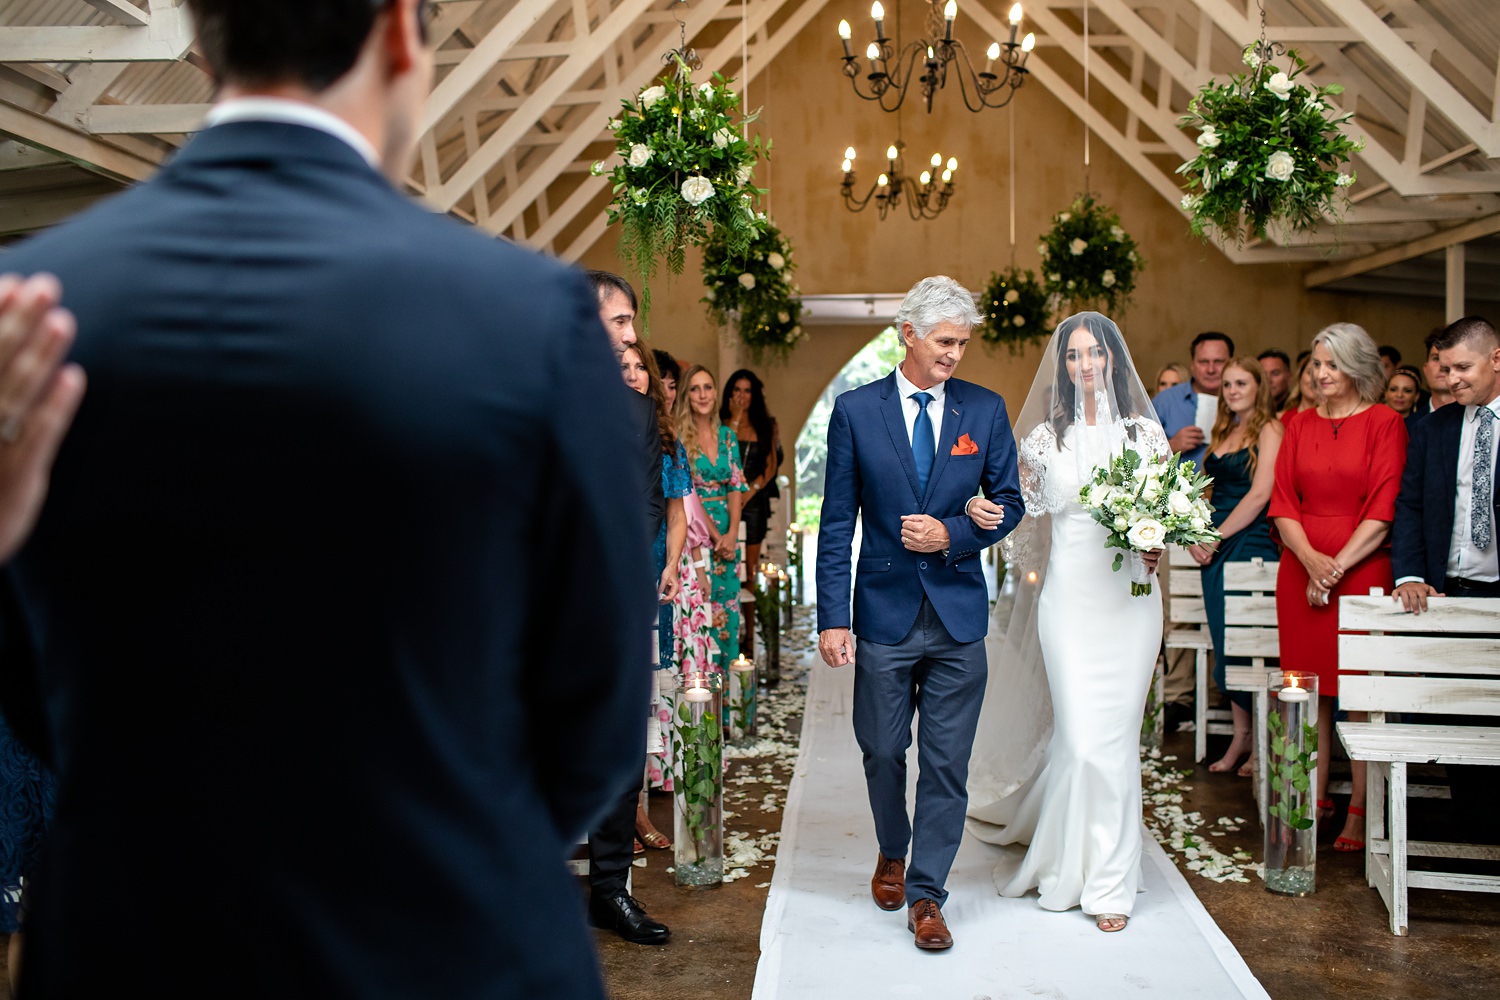 The groom watches as father and daughter walk down the aisle surrounded by smiling guests, flowers and high white ceilings in The Plantation Chapel.